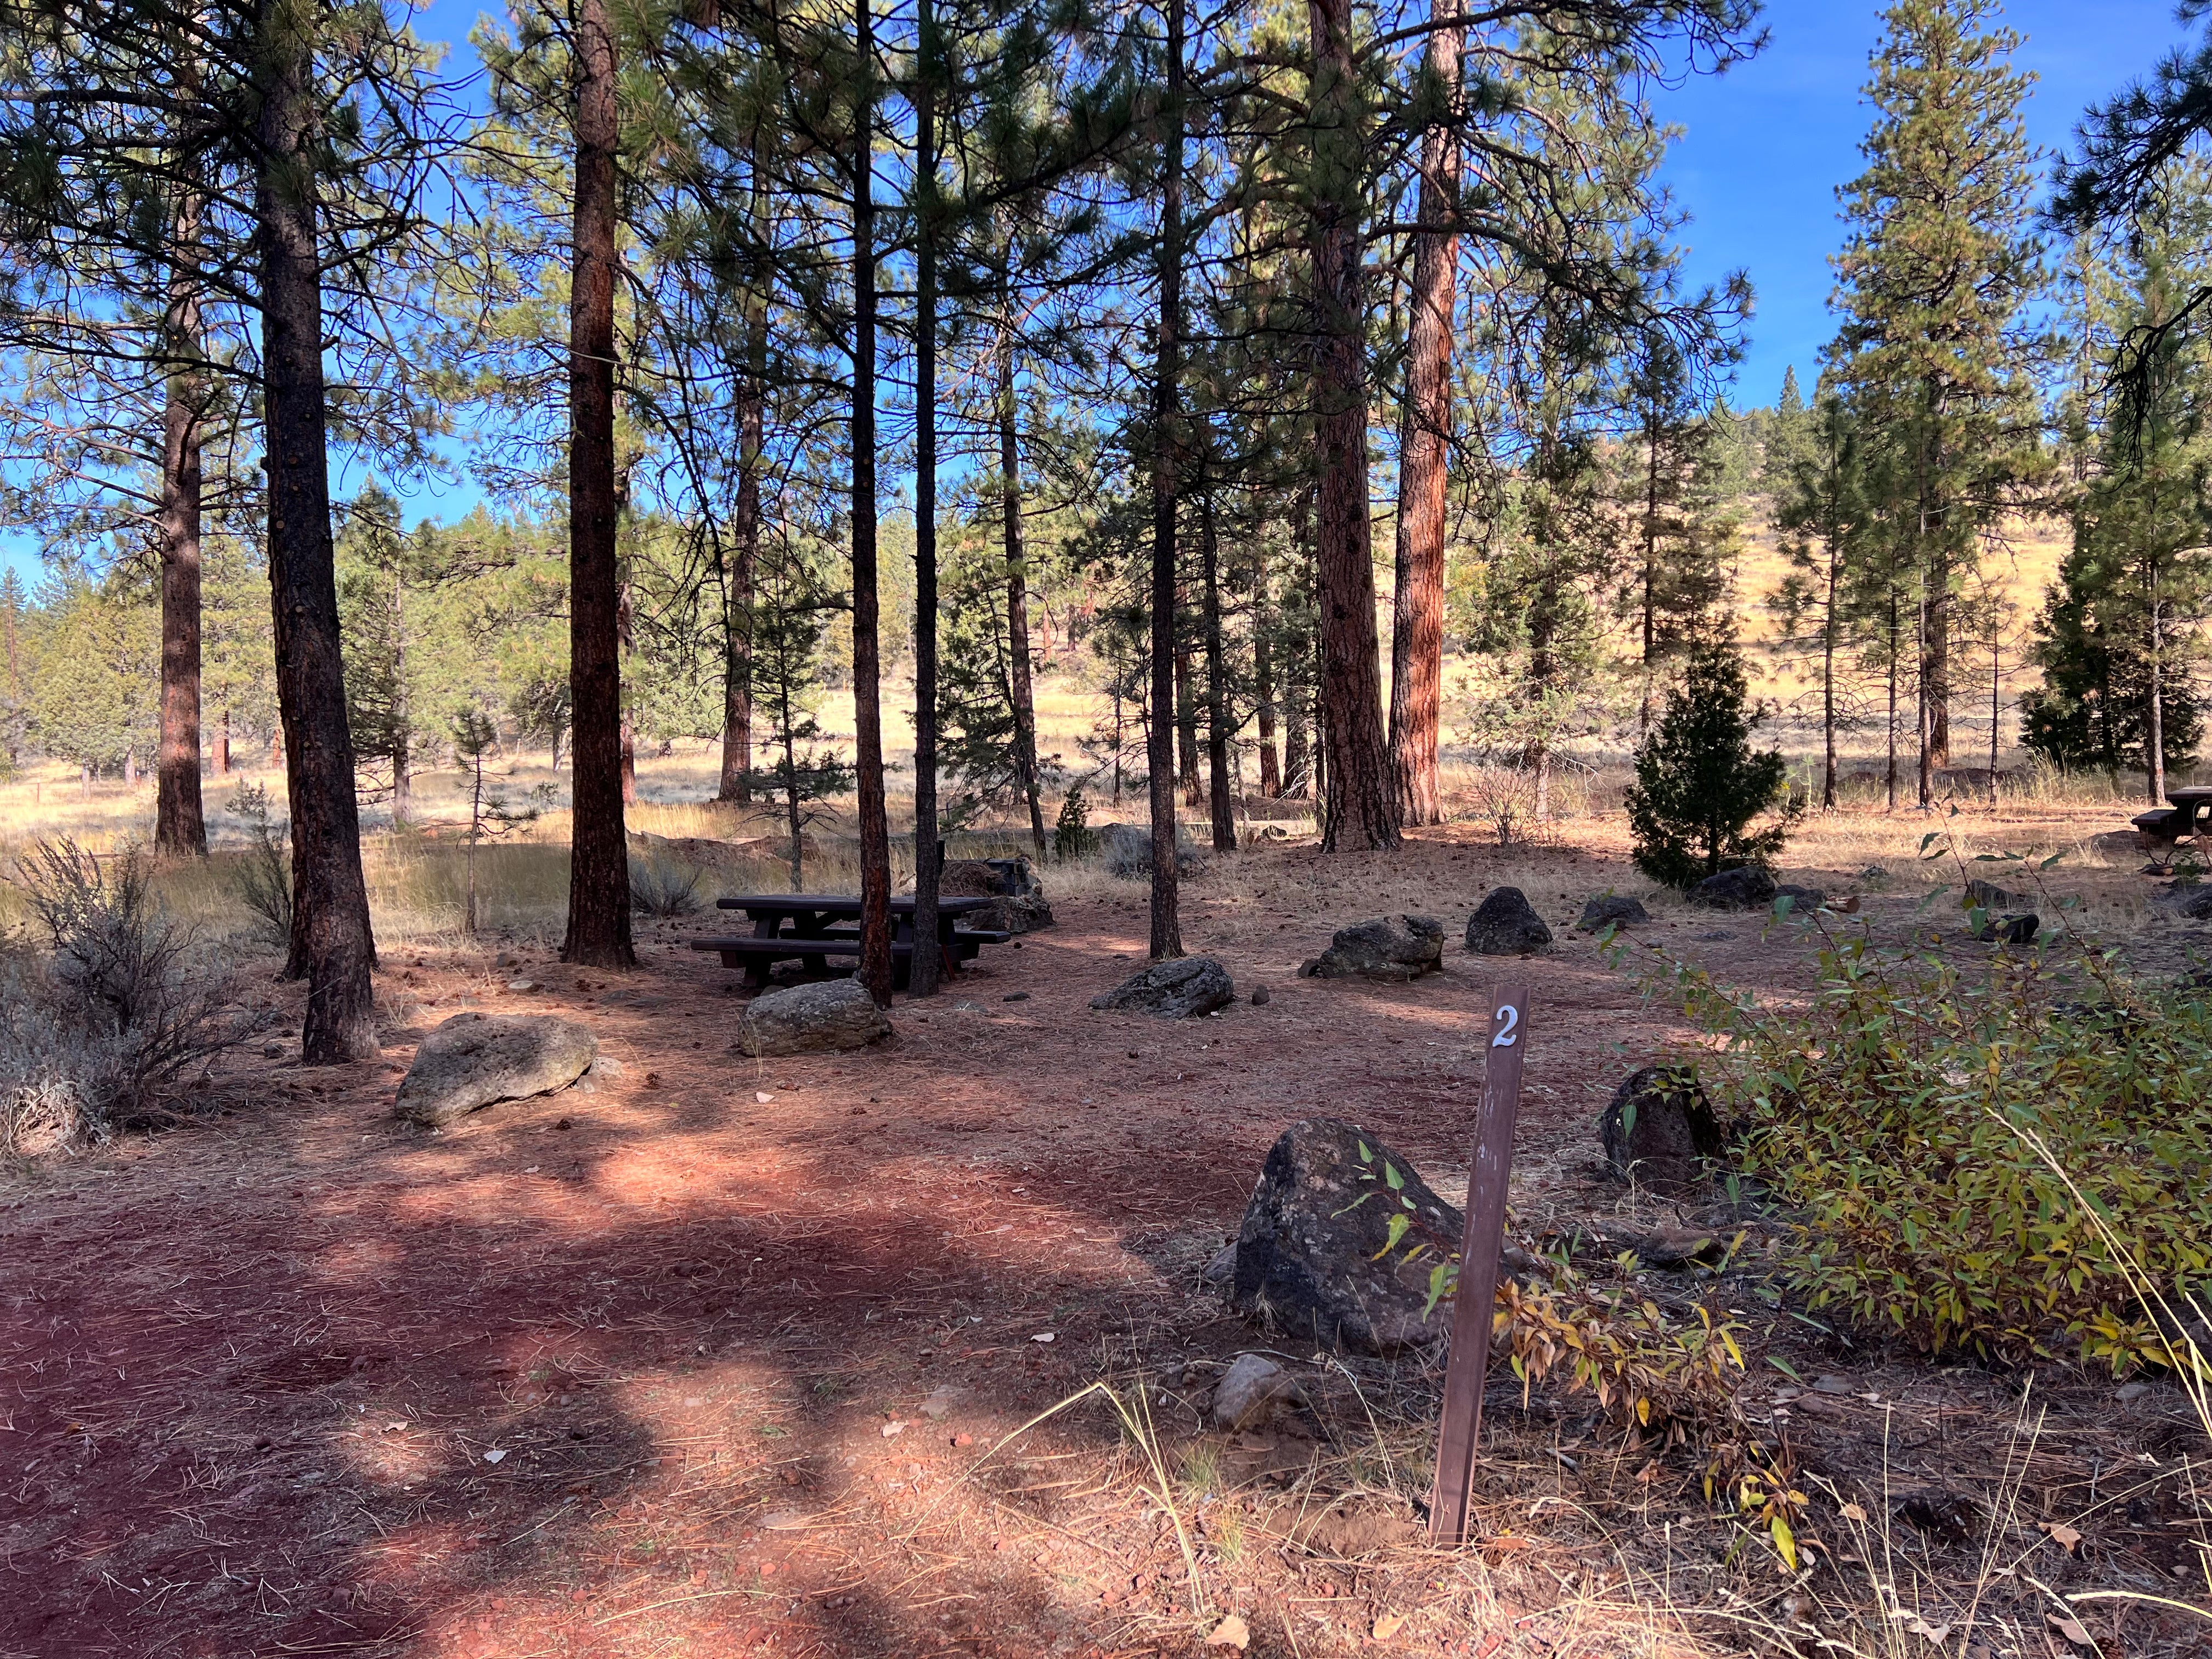 Camper submitted image from Lower Rush Creek Campground - 1